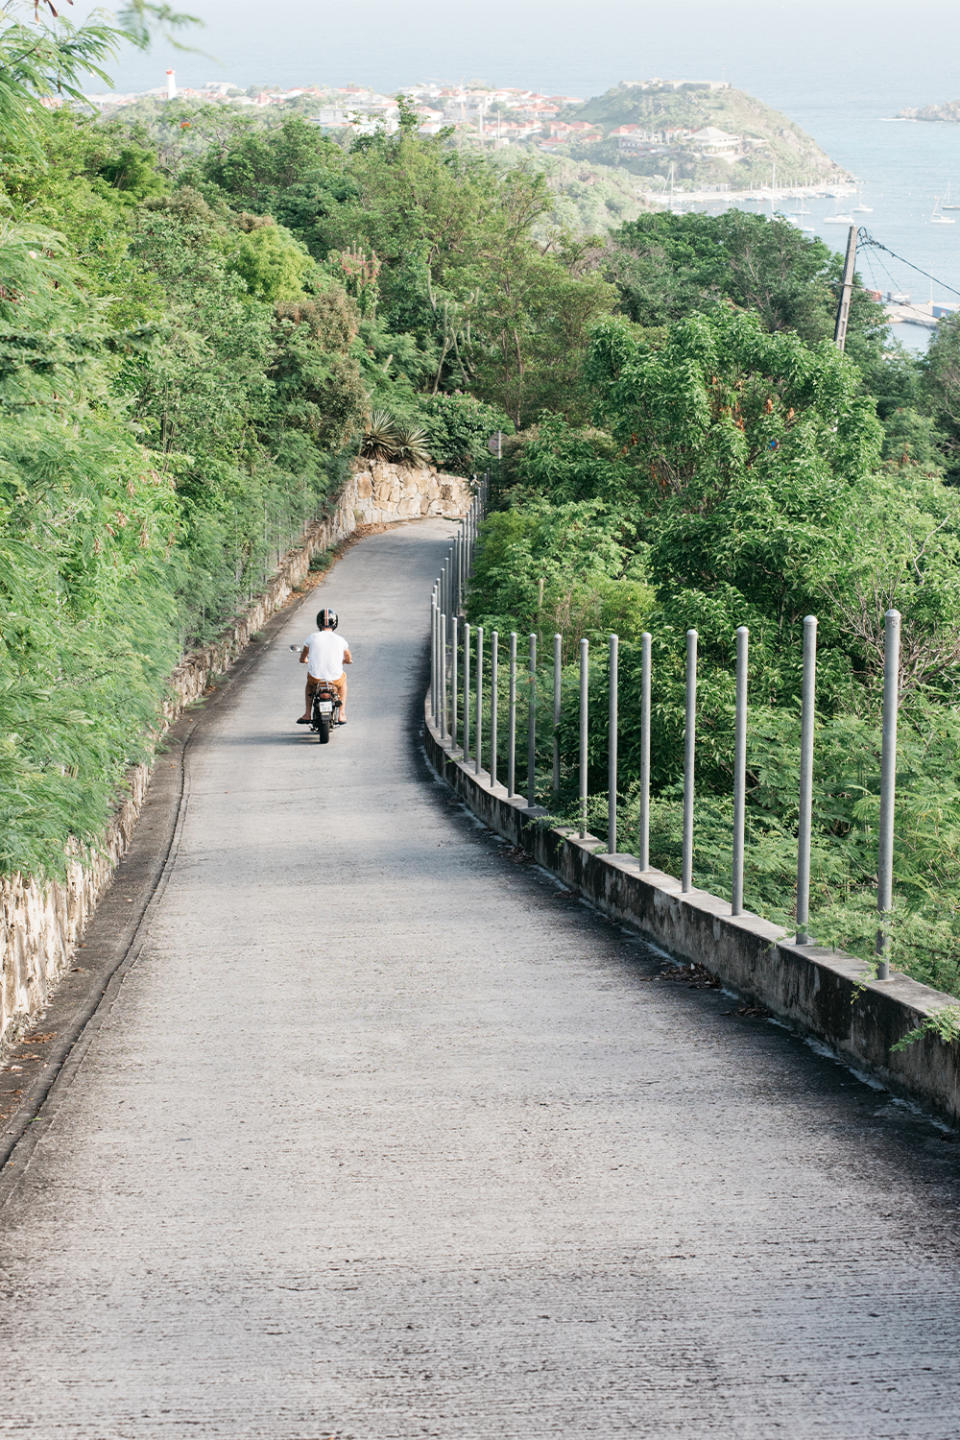 A resident rides along a local island road